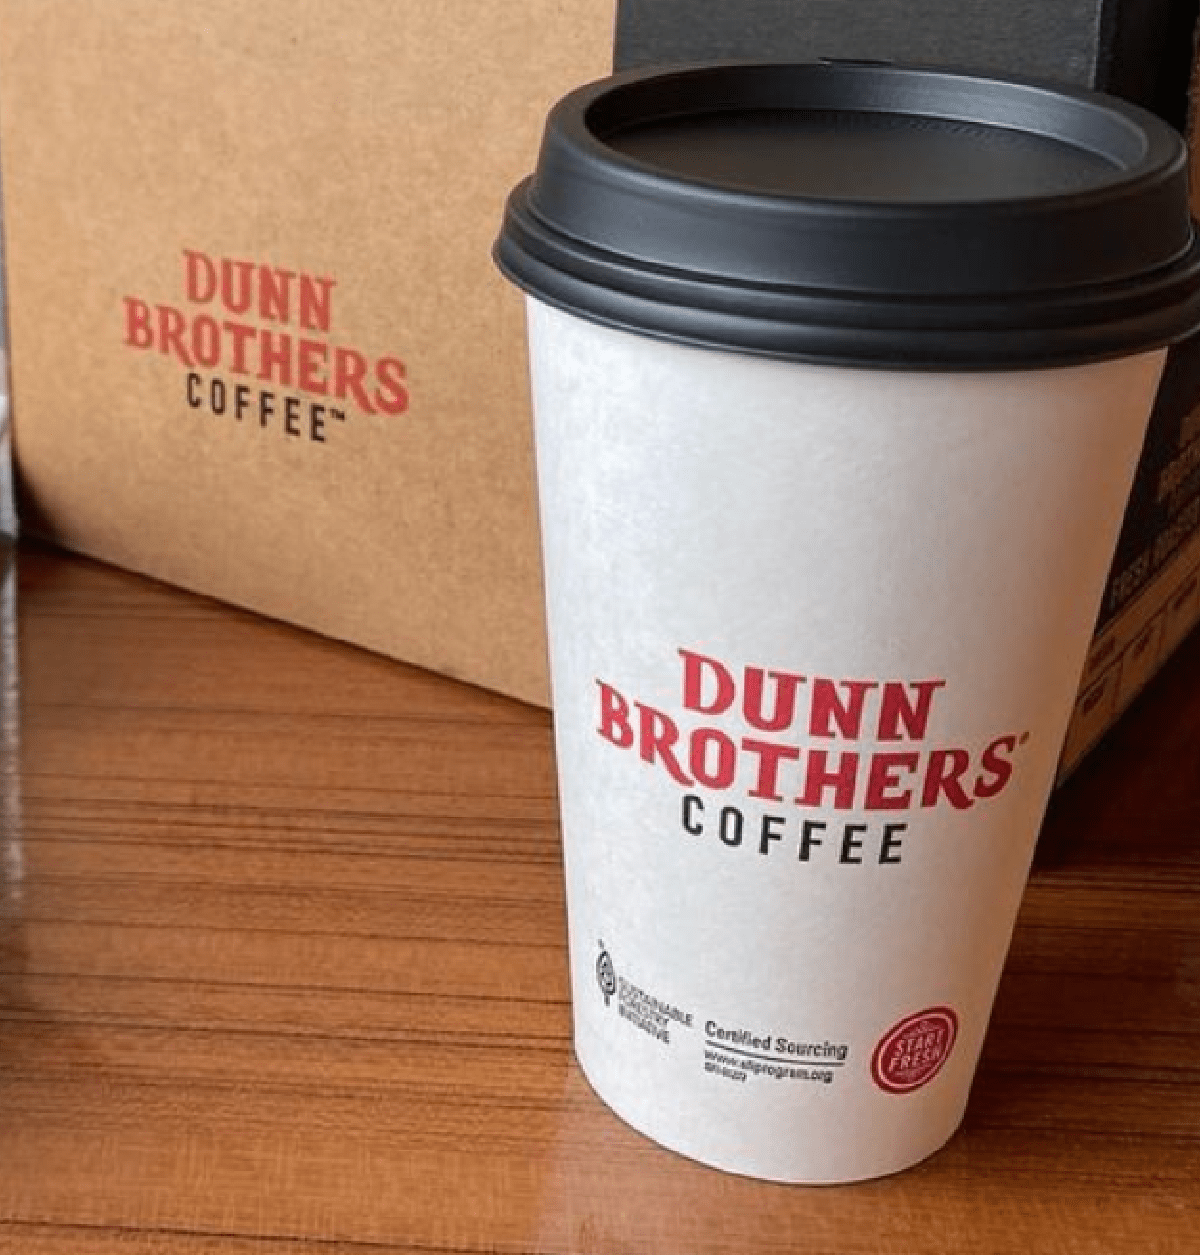 A cup of coffee from dunn brothers, one of the restaurants that has keto birthday freebies